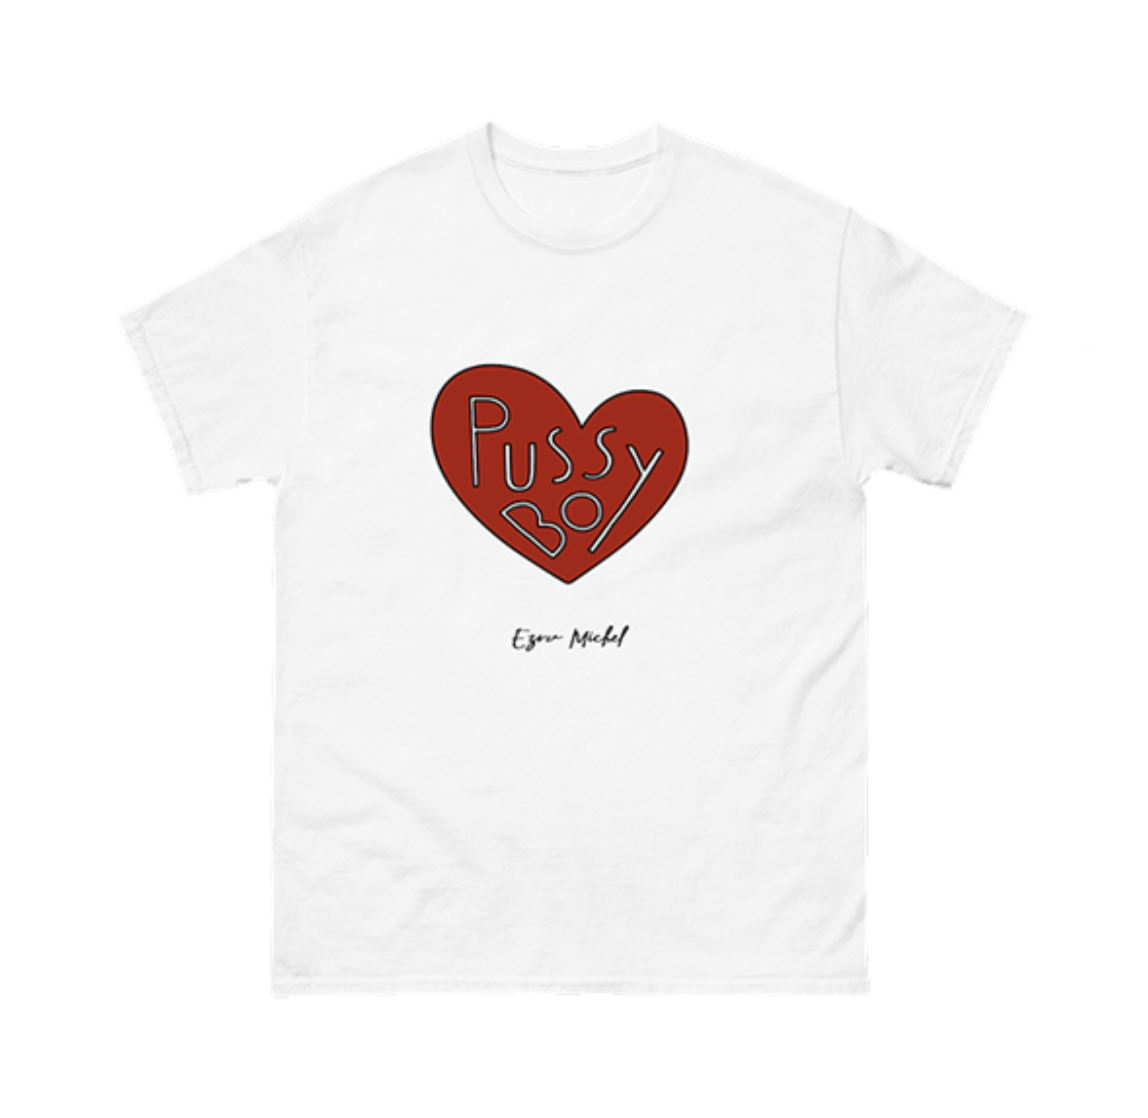 Pussyboy Heart Tee - White - sale